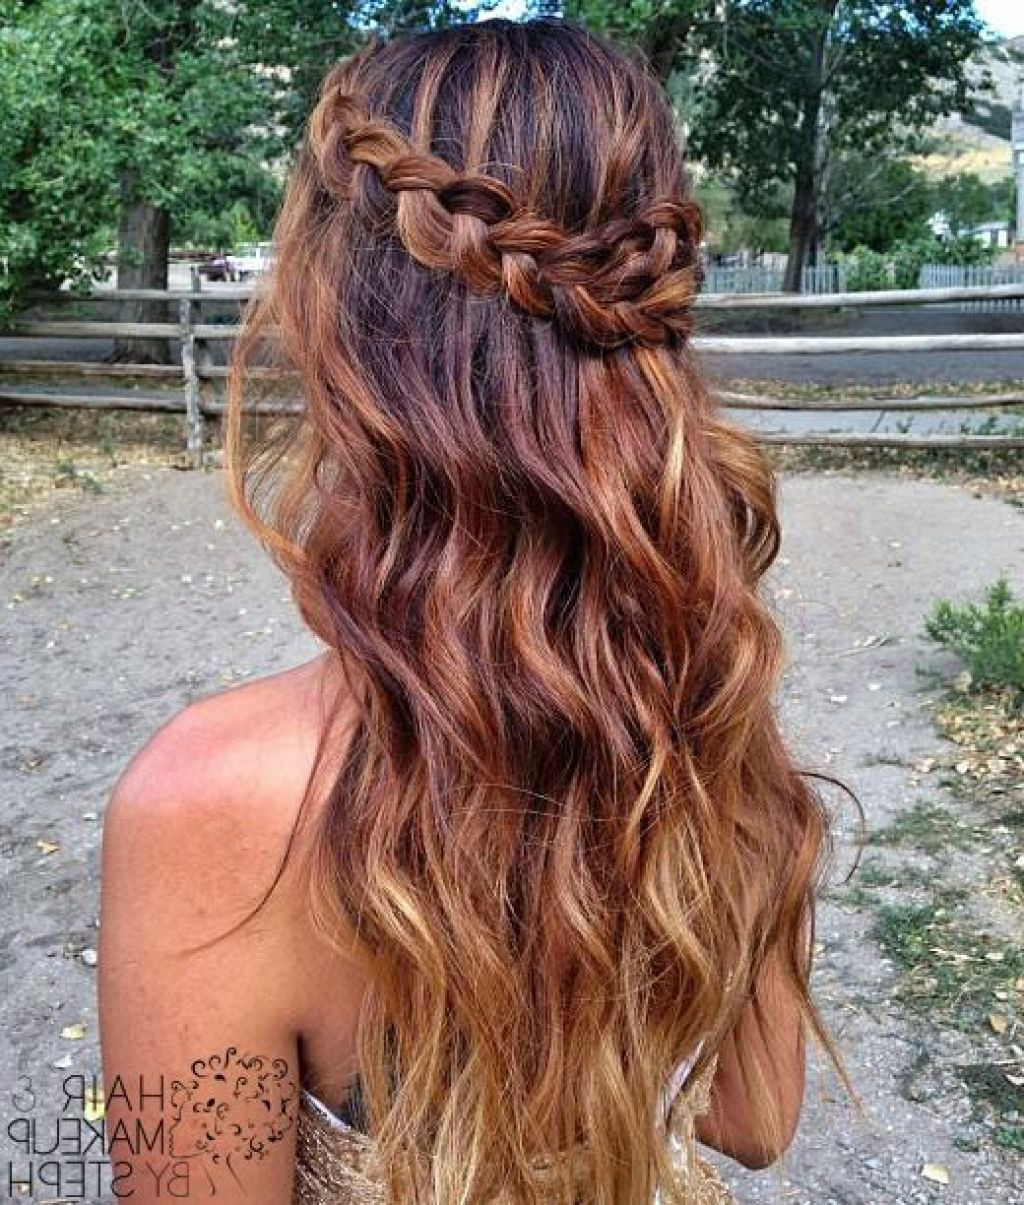 Halfup Prom Hairstyles
 Pretty hairstyles for Prom Hairstyles For Long Hair Half